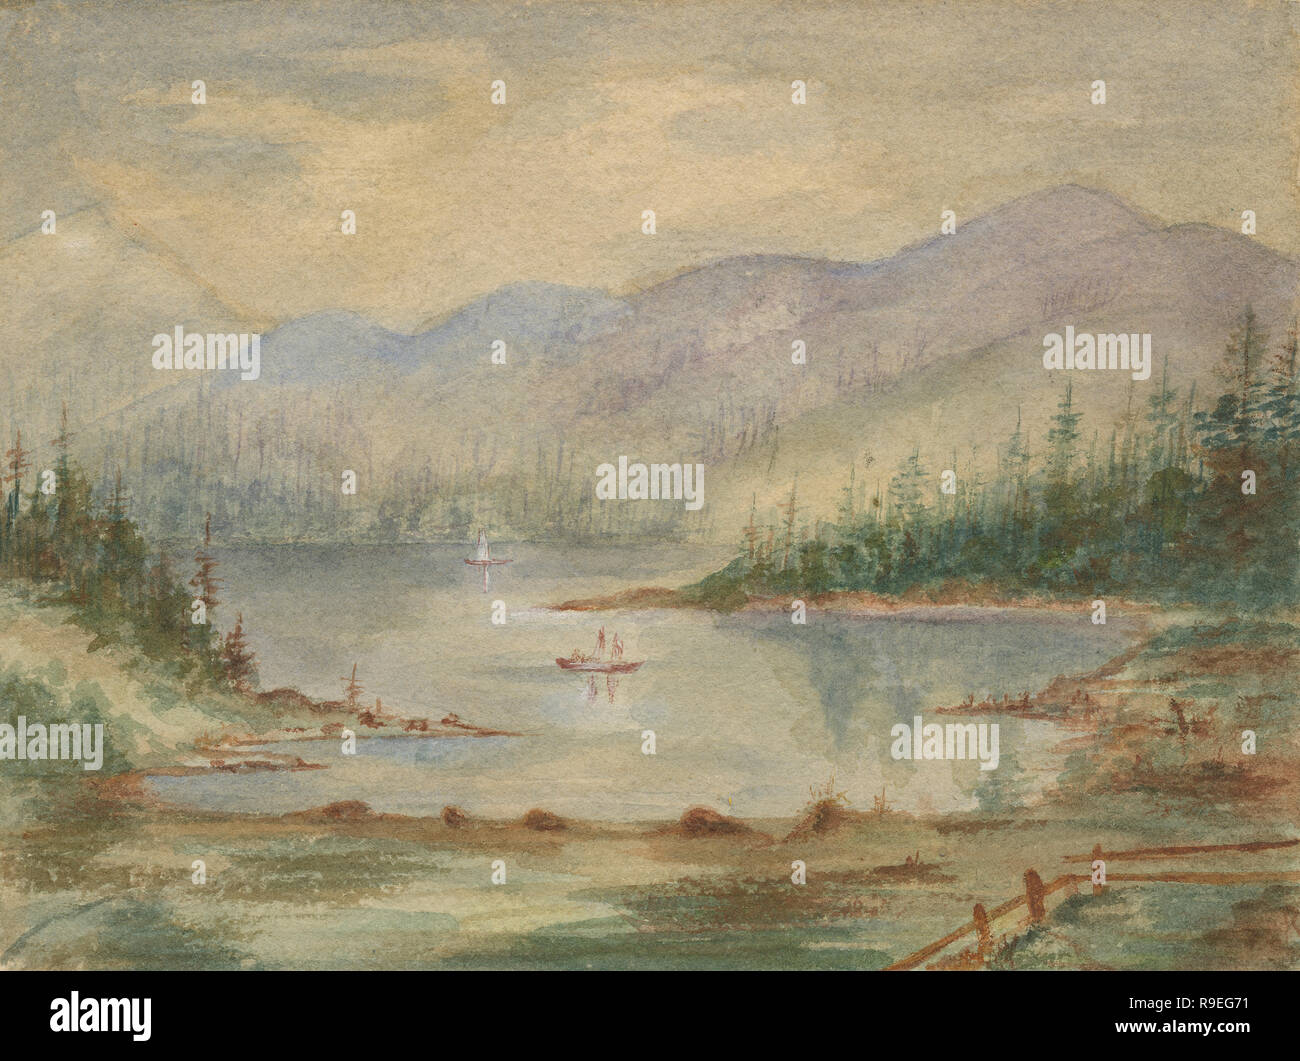 Antique c1890 painting of a mountain lake landscape with boats. SOURCE: ORIGINAL PAINTING Stock Photo